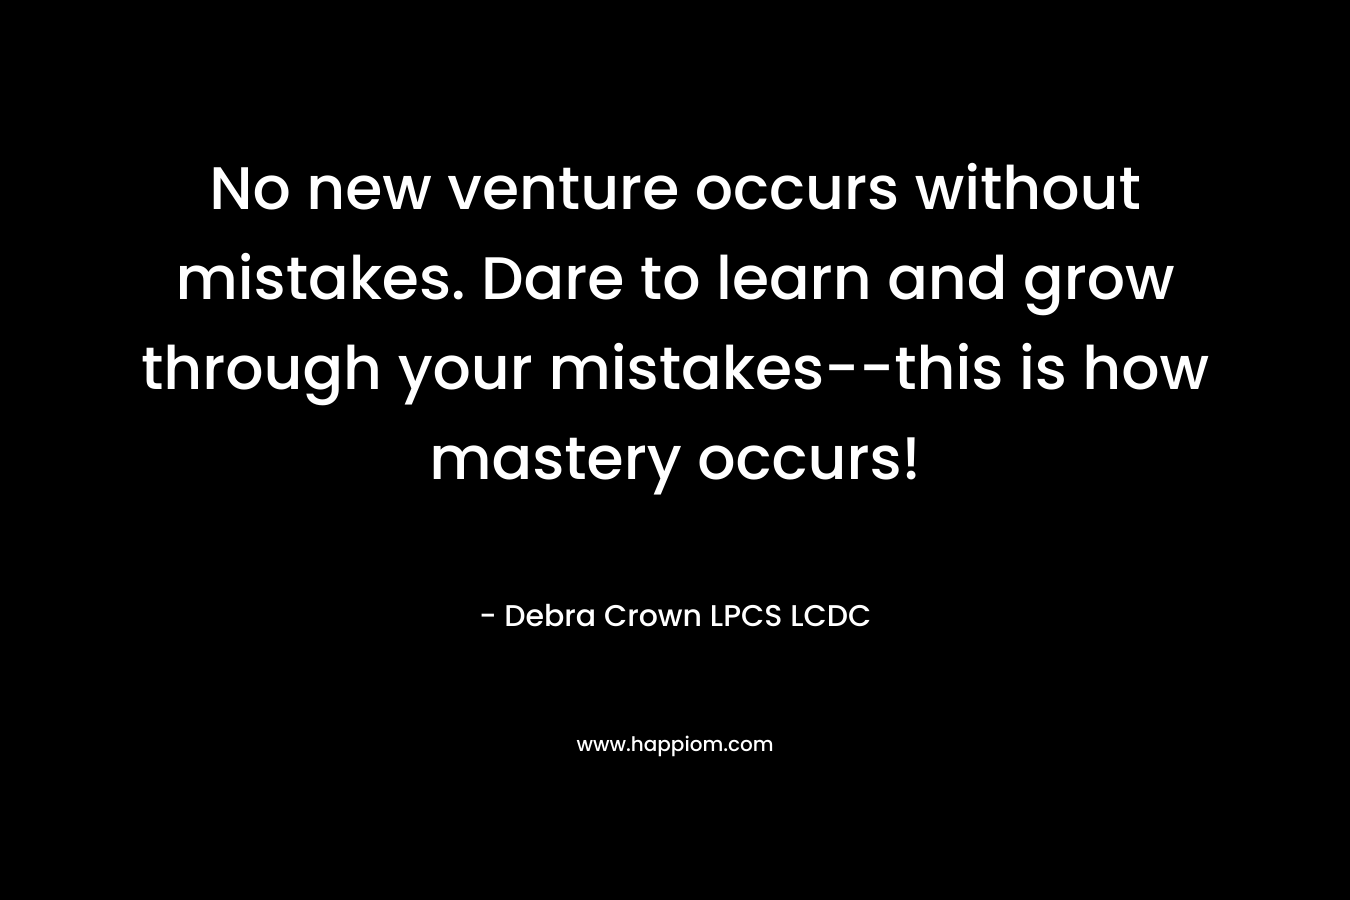 No new venture occurs without mistakes. Dare to learn and grow through your mistakes–this is how mastery occurs! – Debra Crown LPCS LCDC